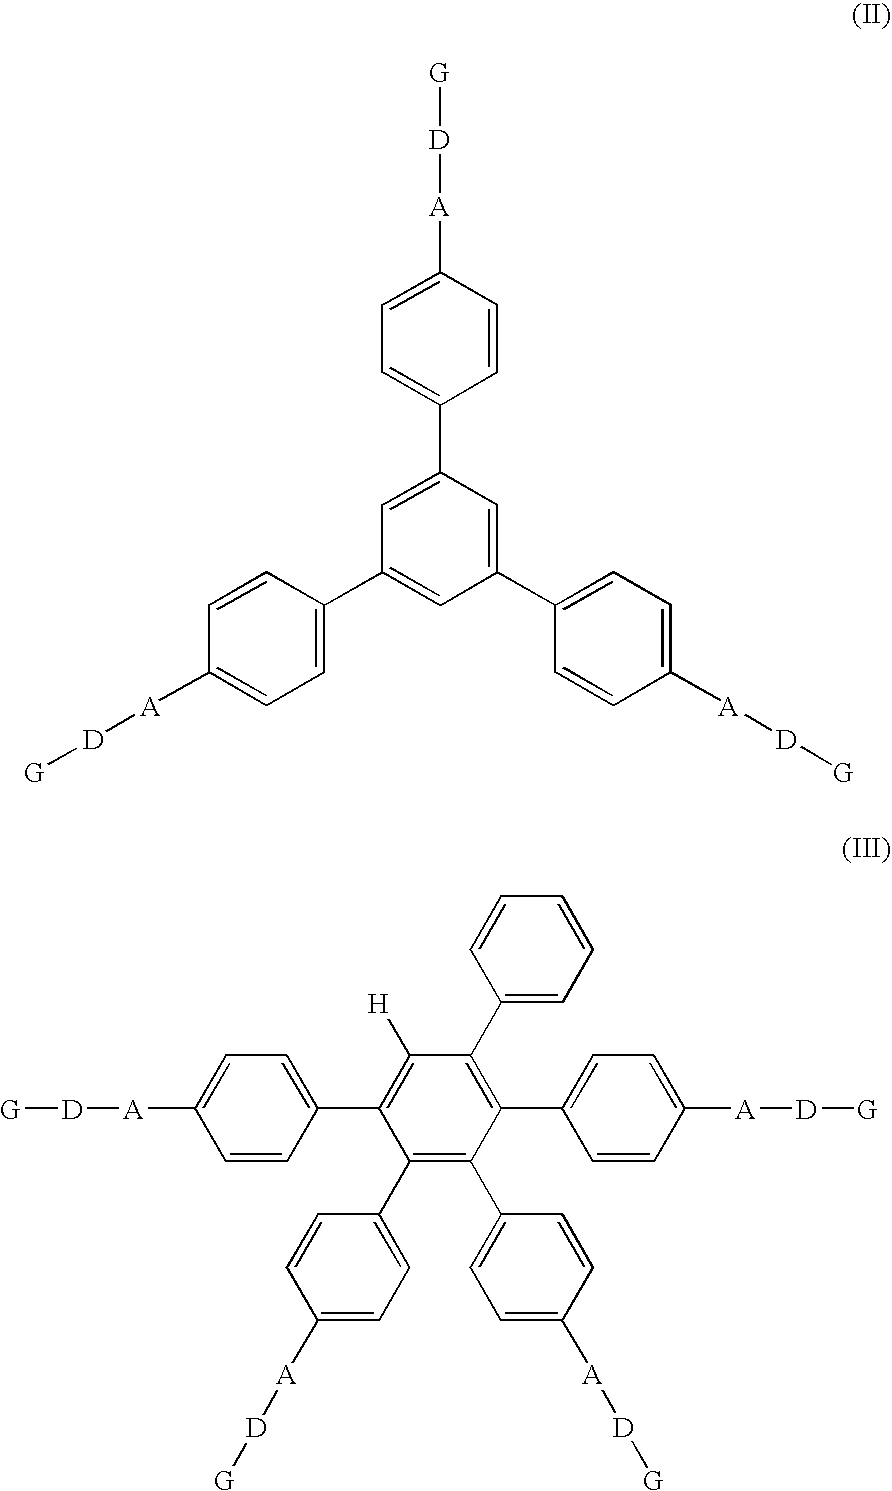 Star macromonomers and polymeric materials and medical devices comprising same